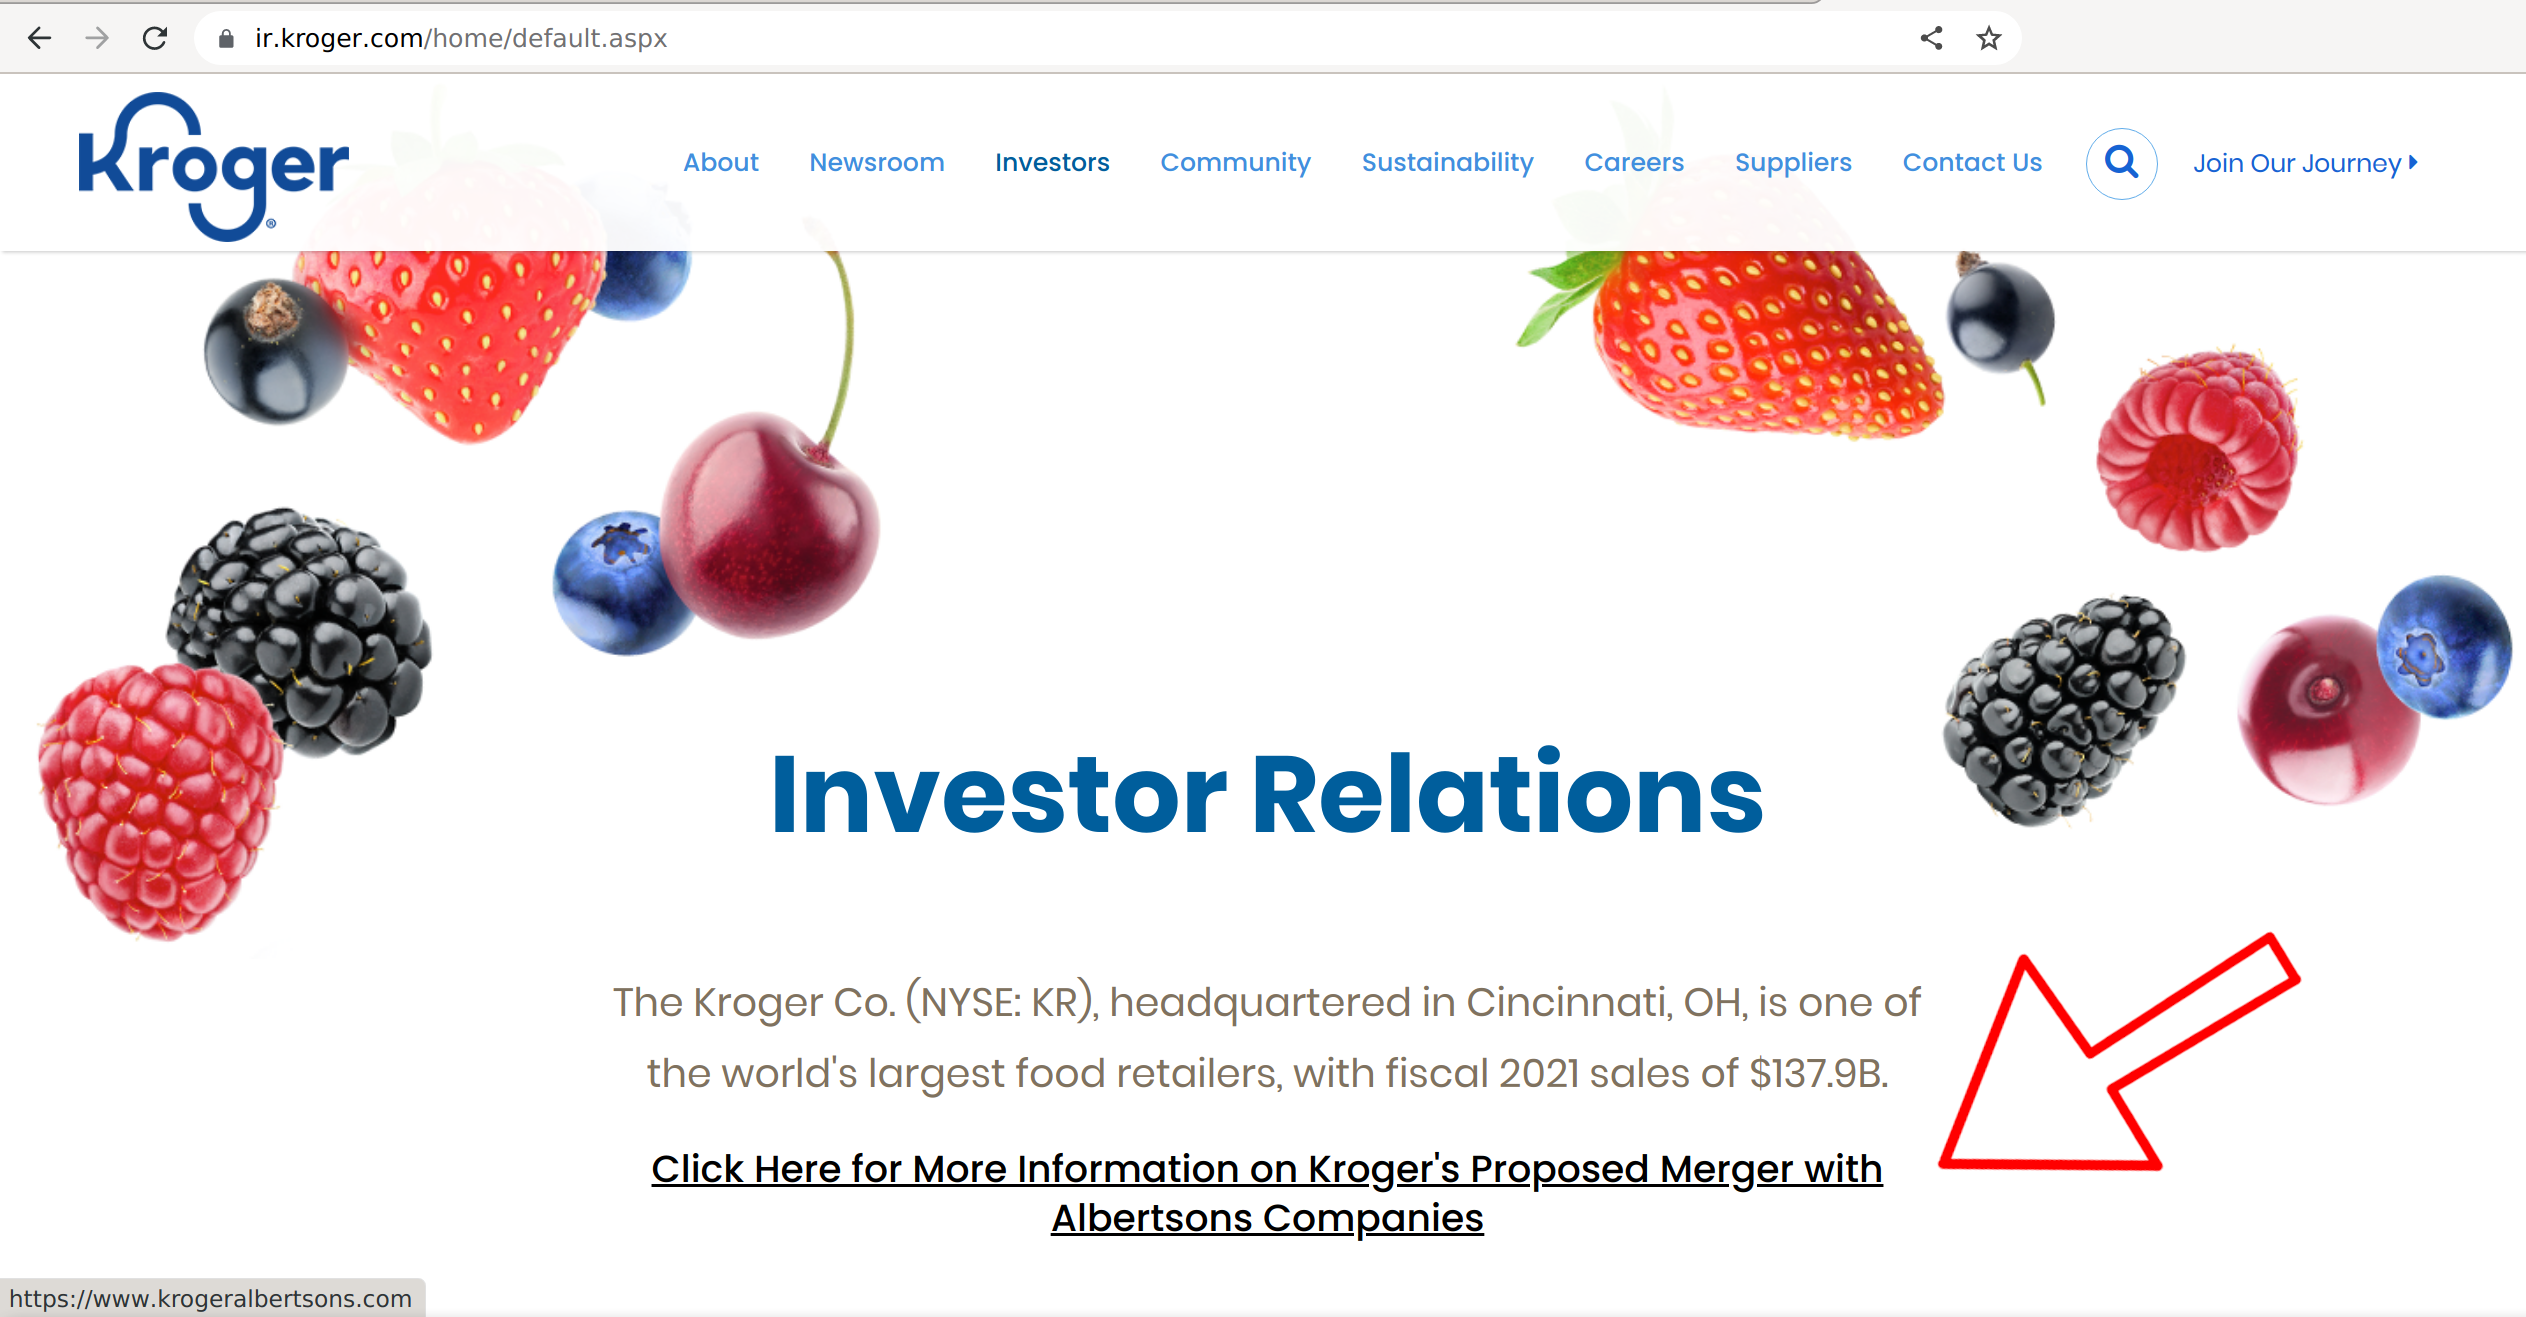 Image of Krogers investor relations page with a link to information about the merger